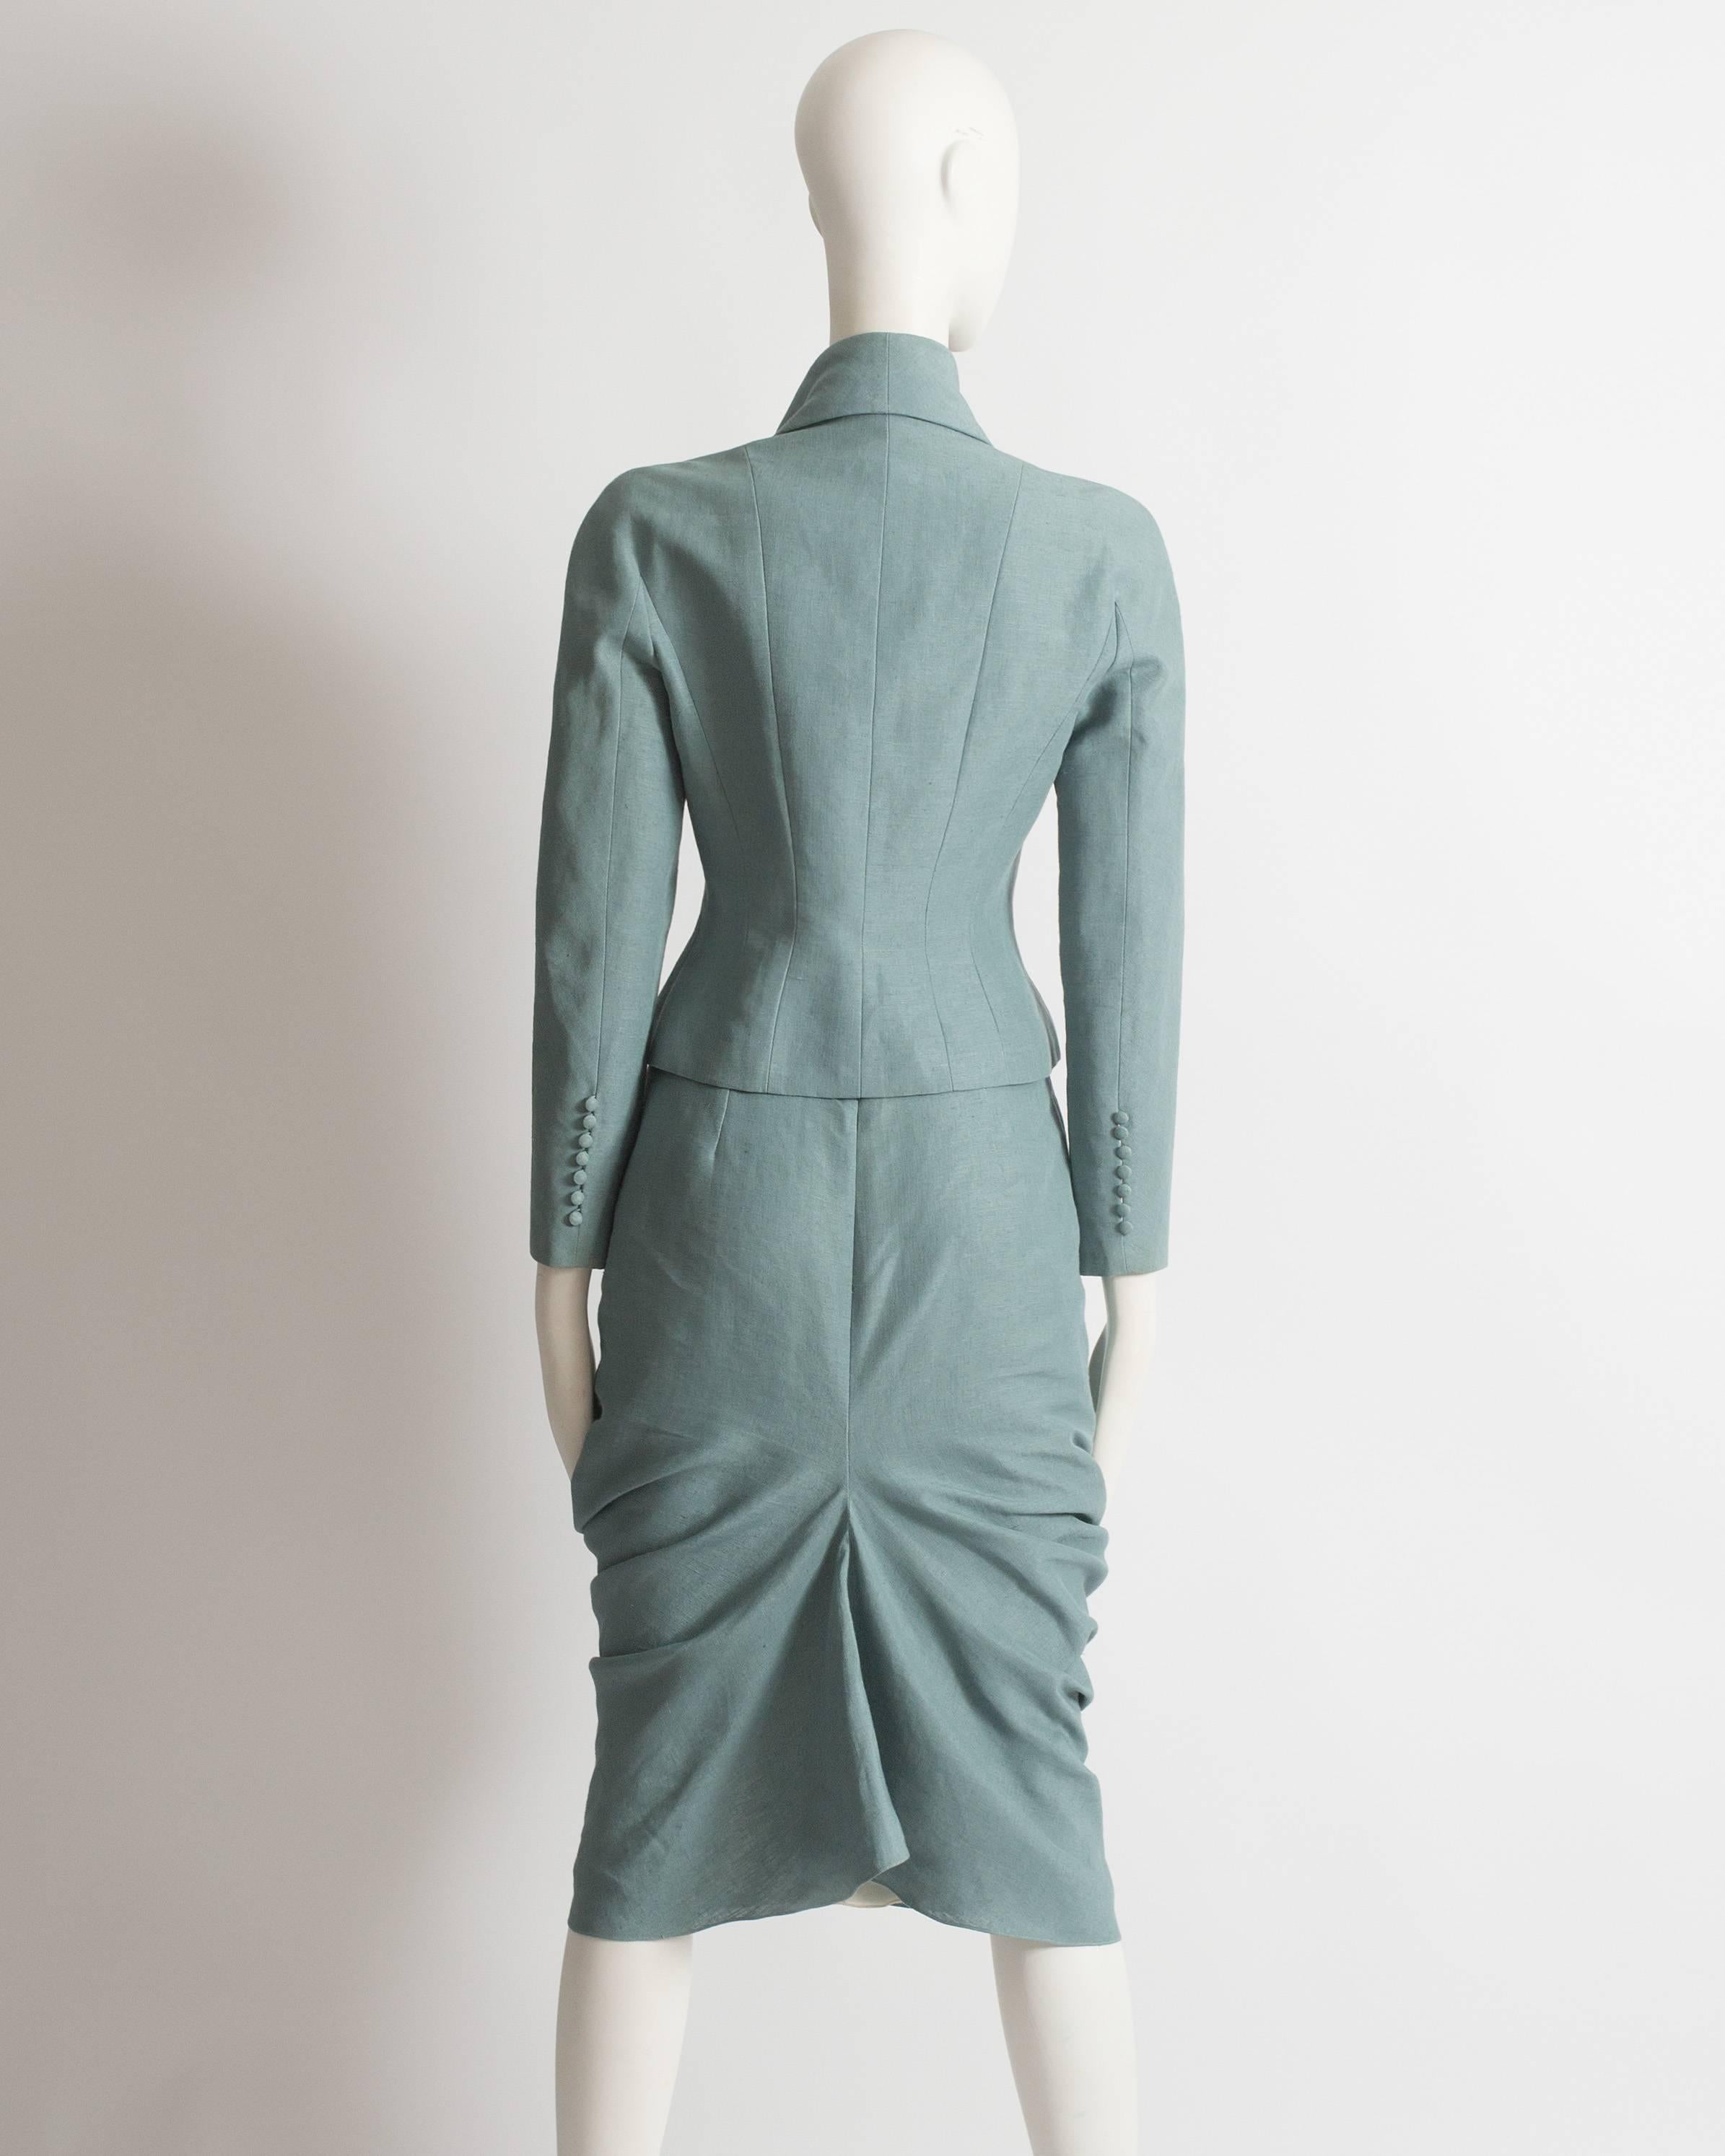 Women's John Galliano teal linen jacket and draped skirt suit, ss 1999 For Sale